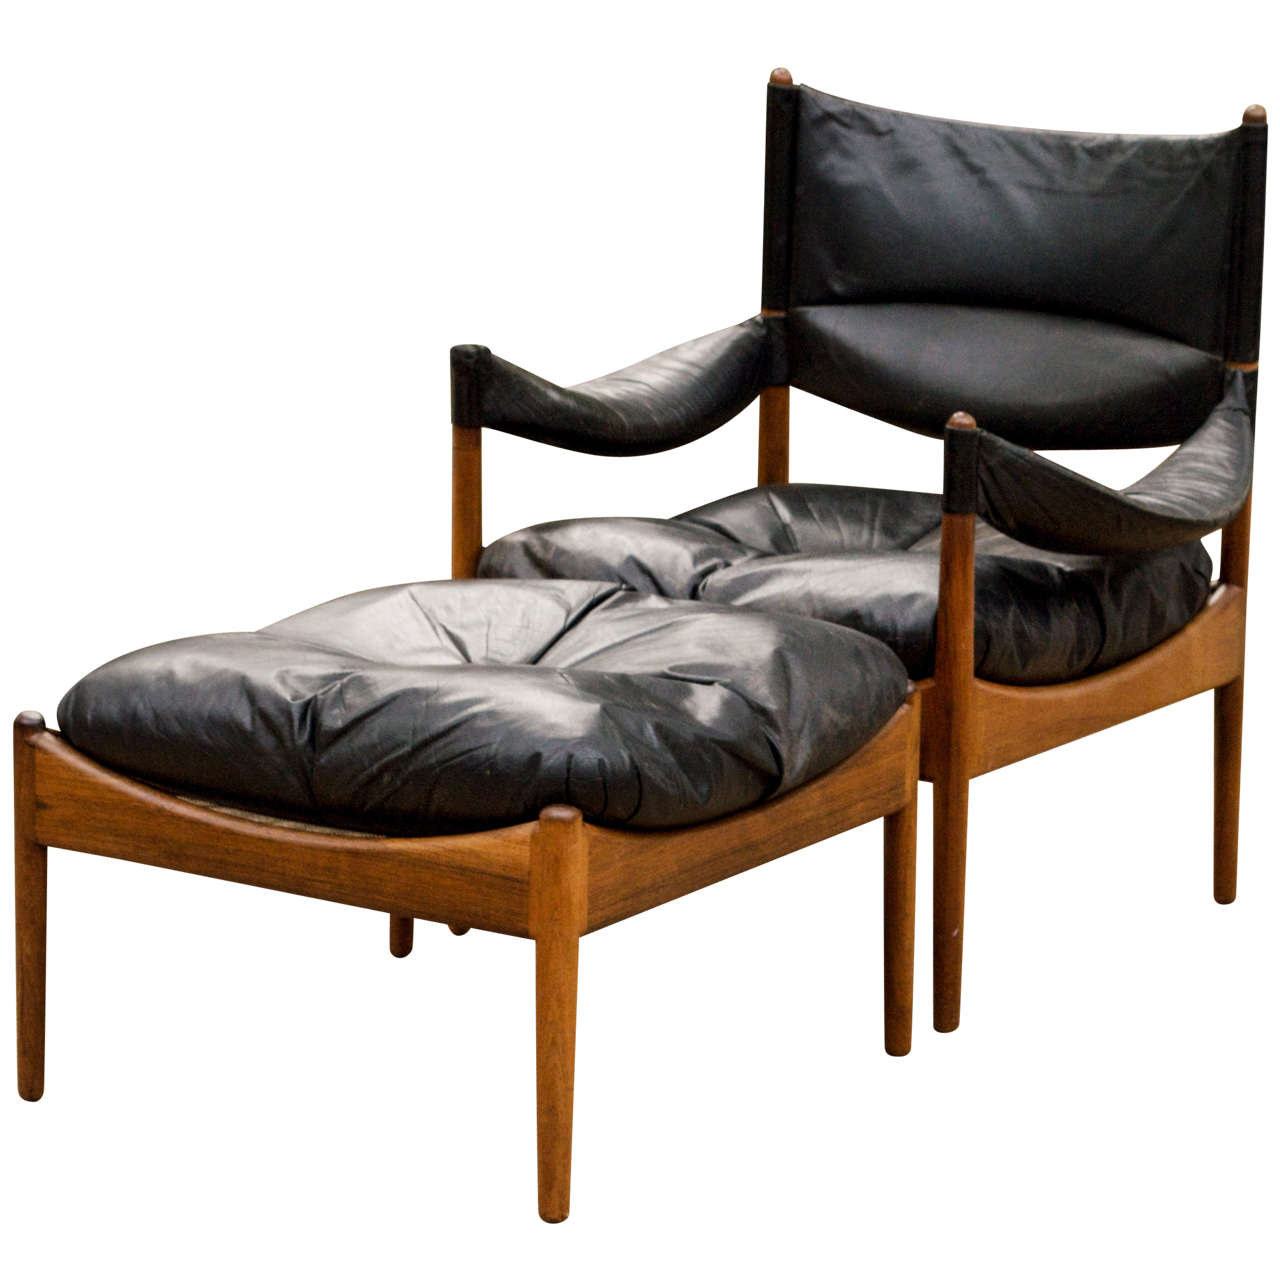 Kristian Solmer Vedel 'Modus' Lounge Chair with Ottoman